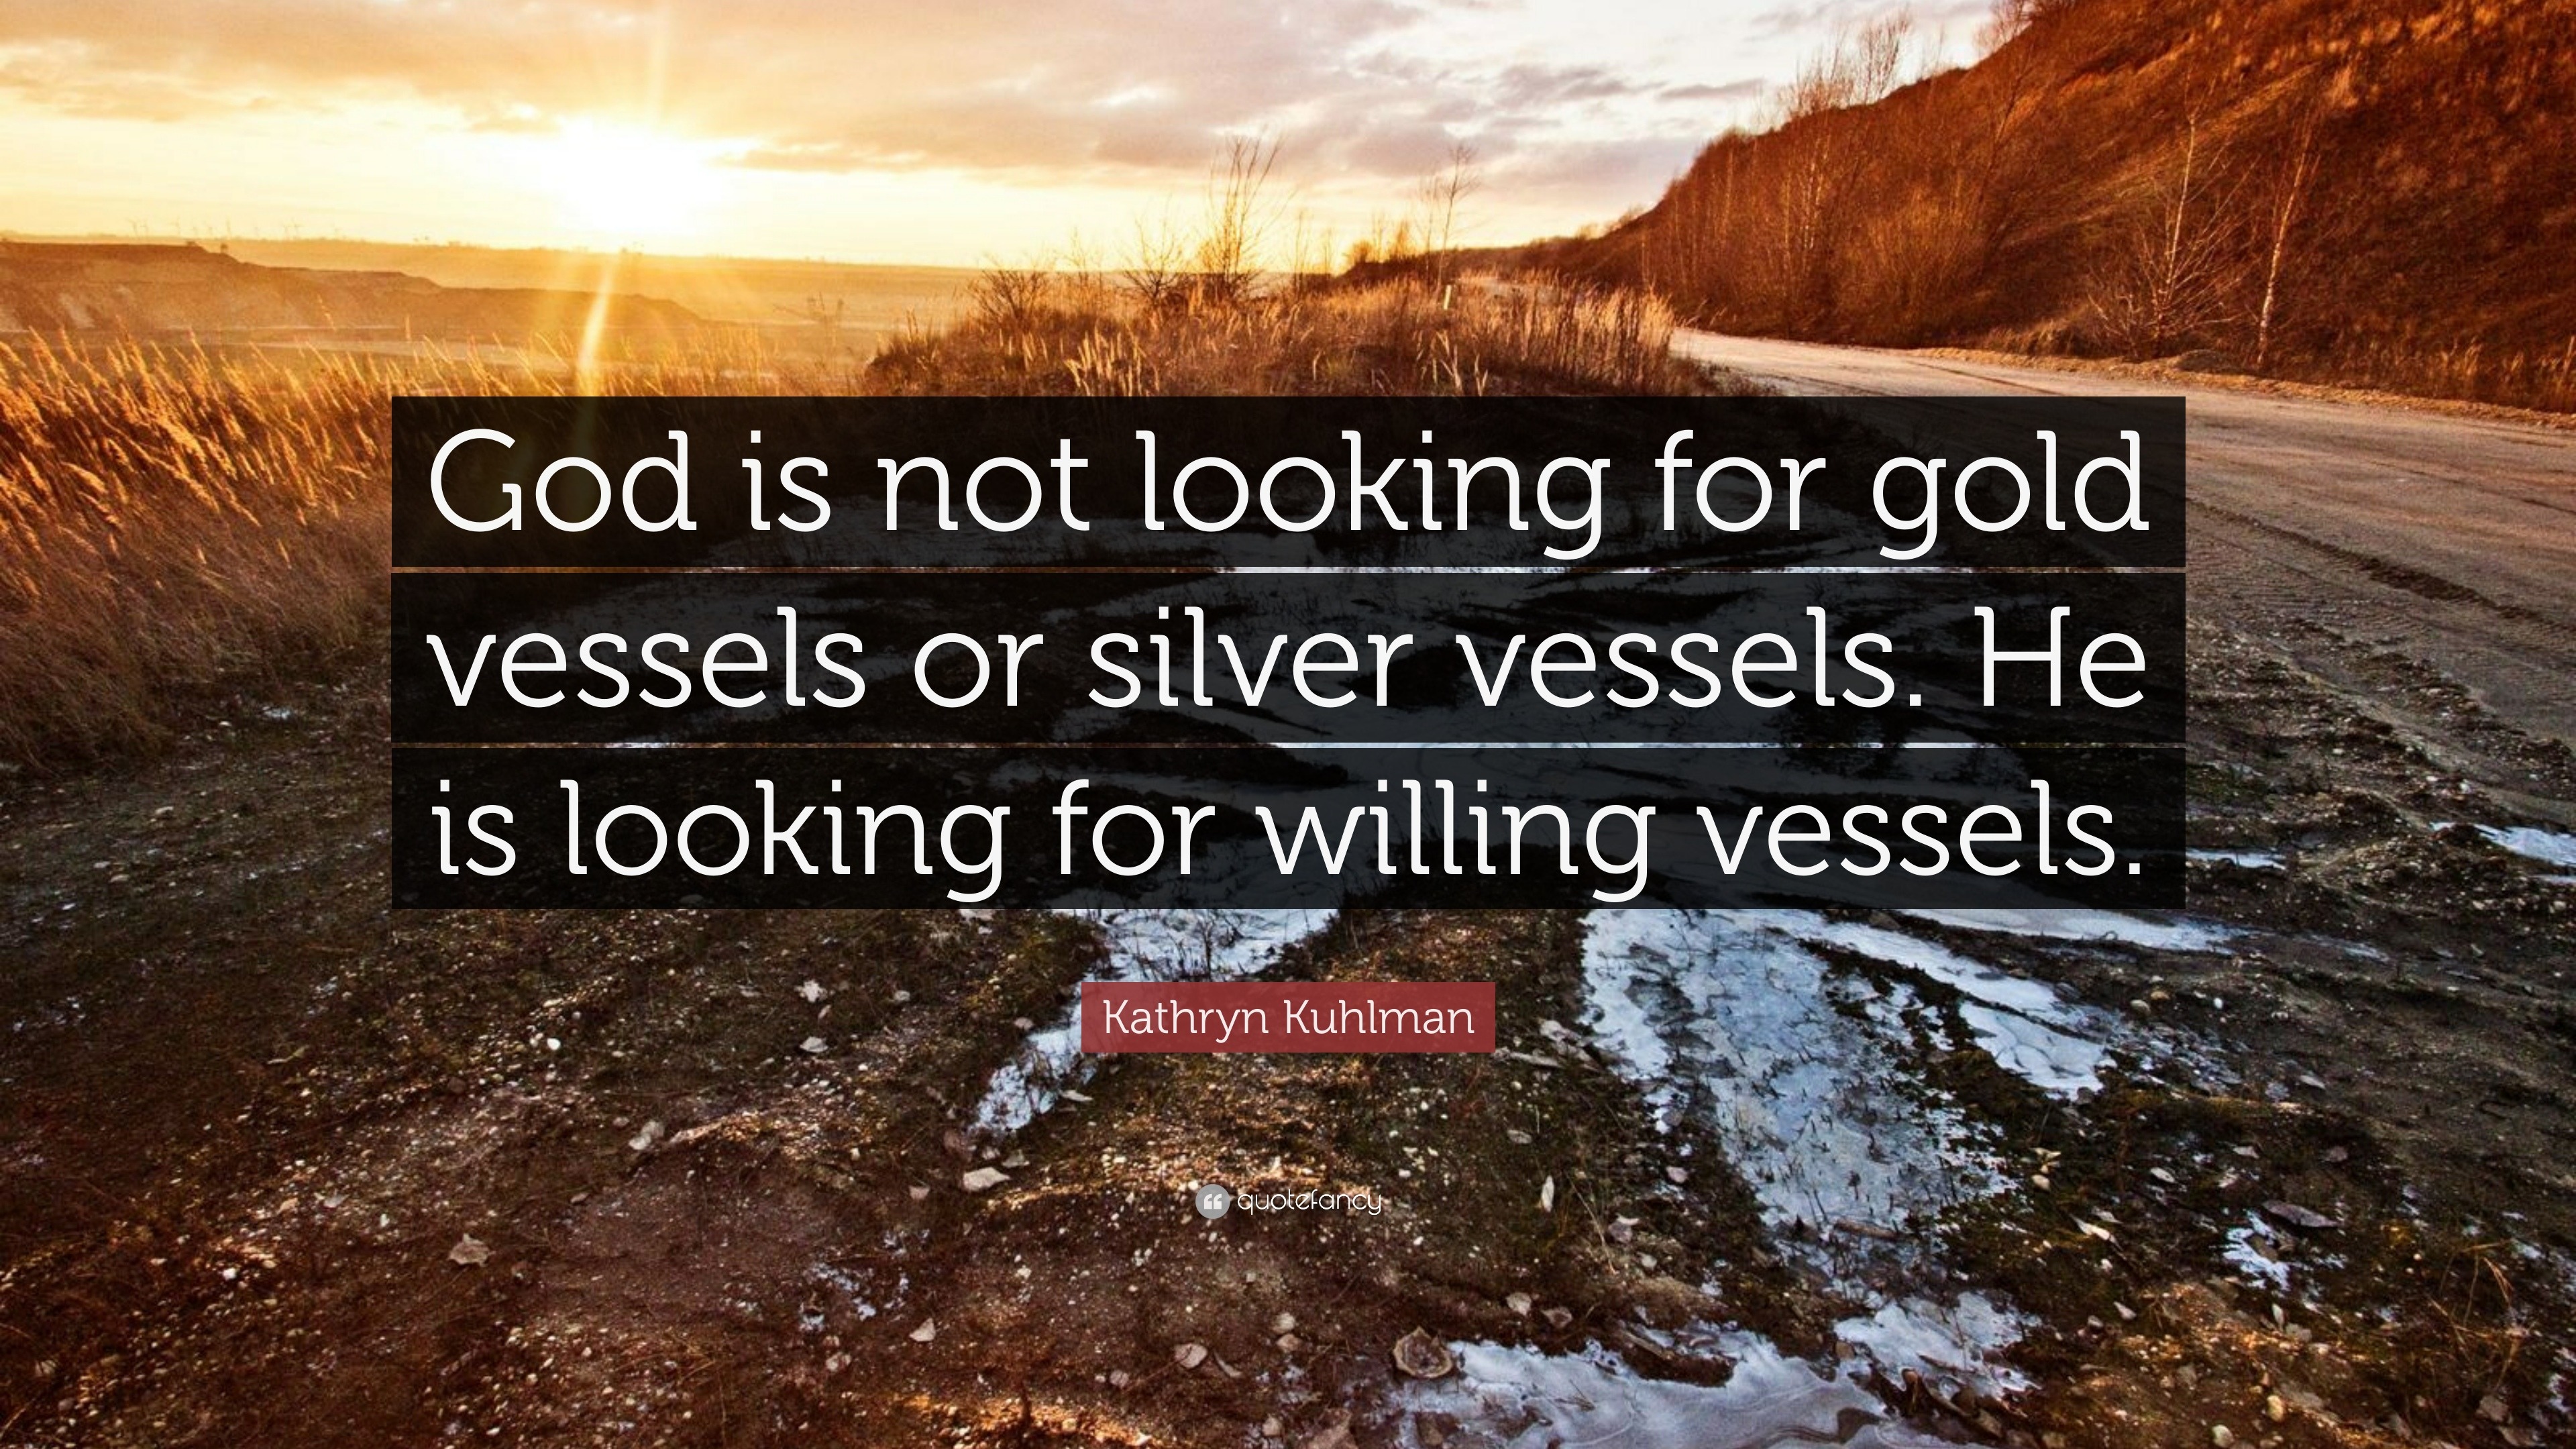 Kathryn Kuhlman Quote “God is not looking for gold vessels or silver